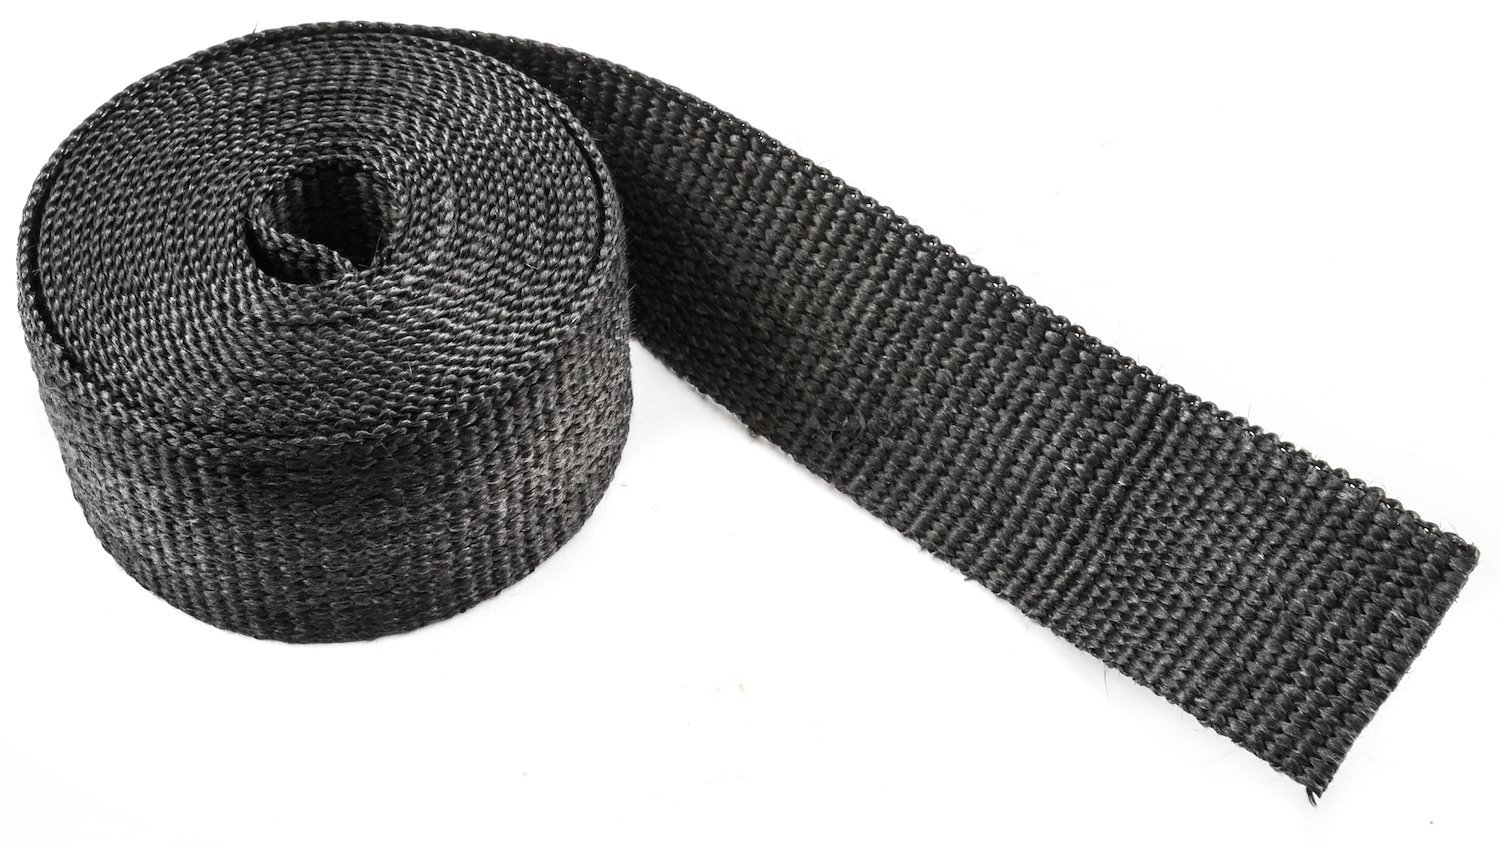 Exhaust & Header Wrap 2" x 15' x 1/16" Thick